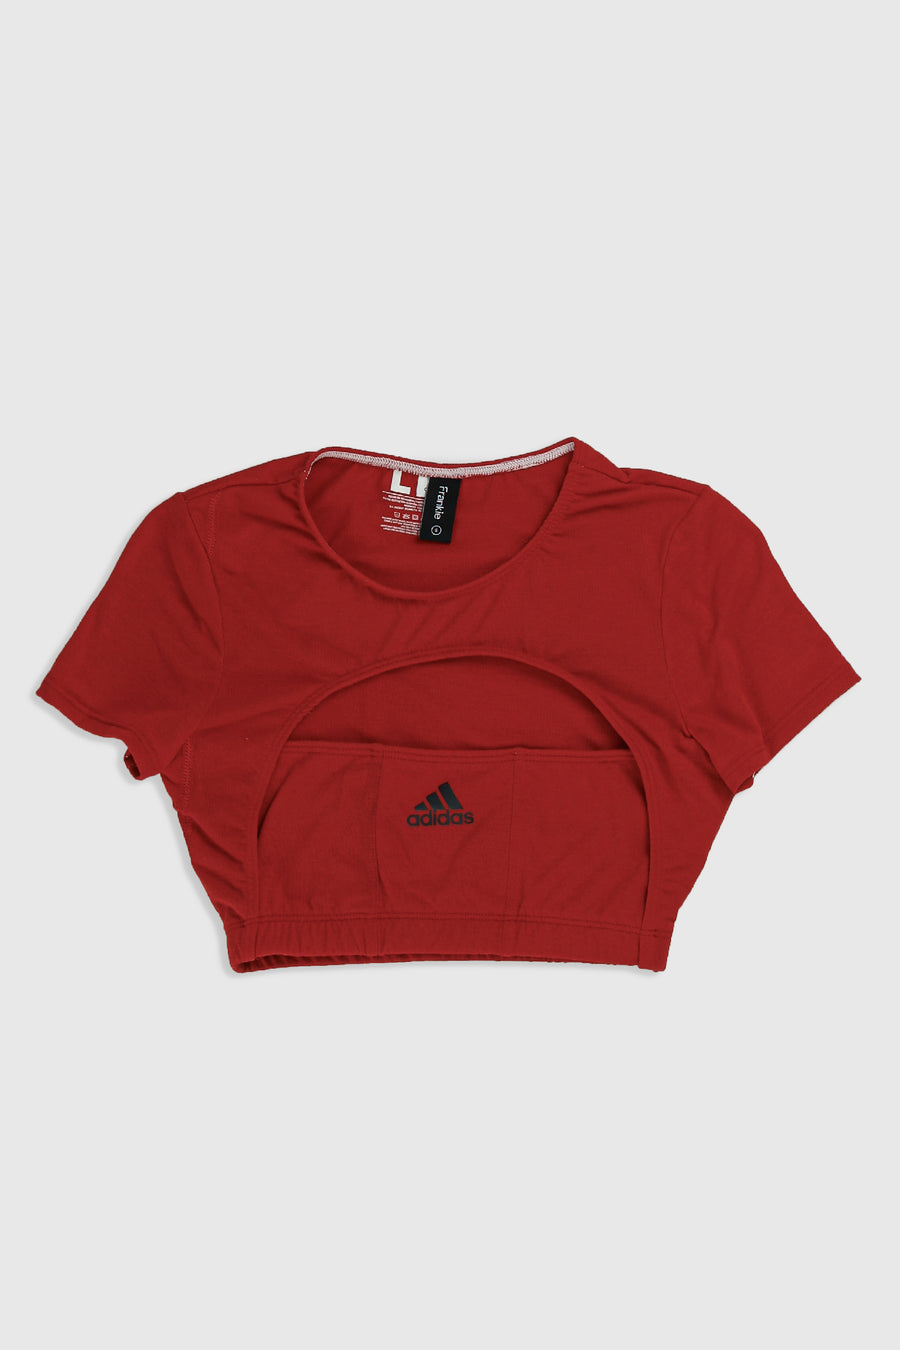 Rework Adidas Cut Out Tee - S